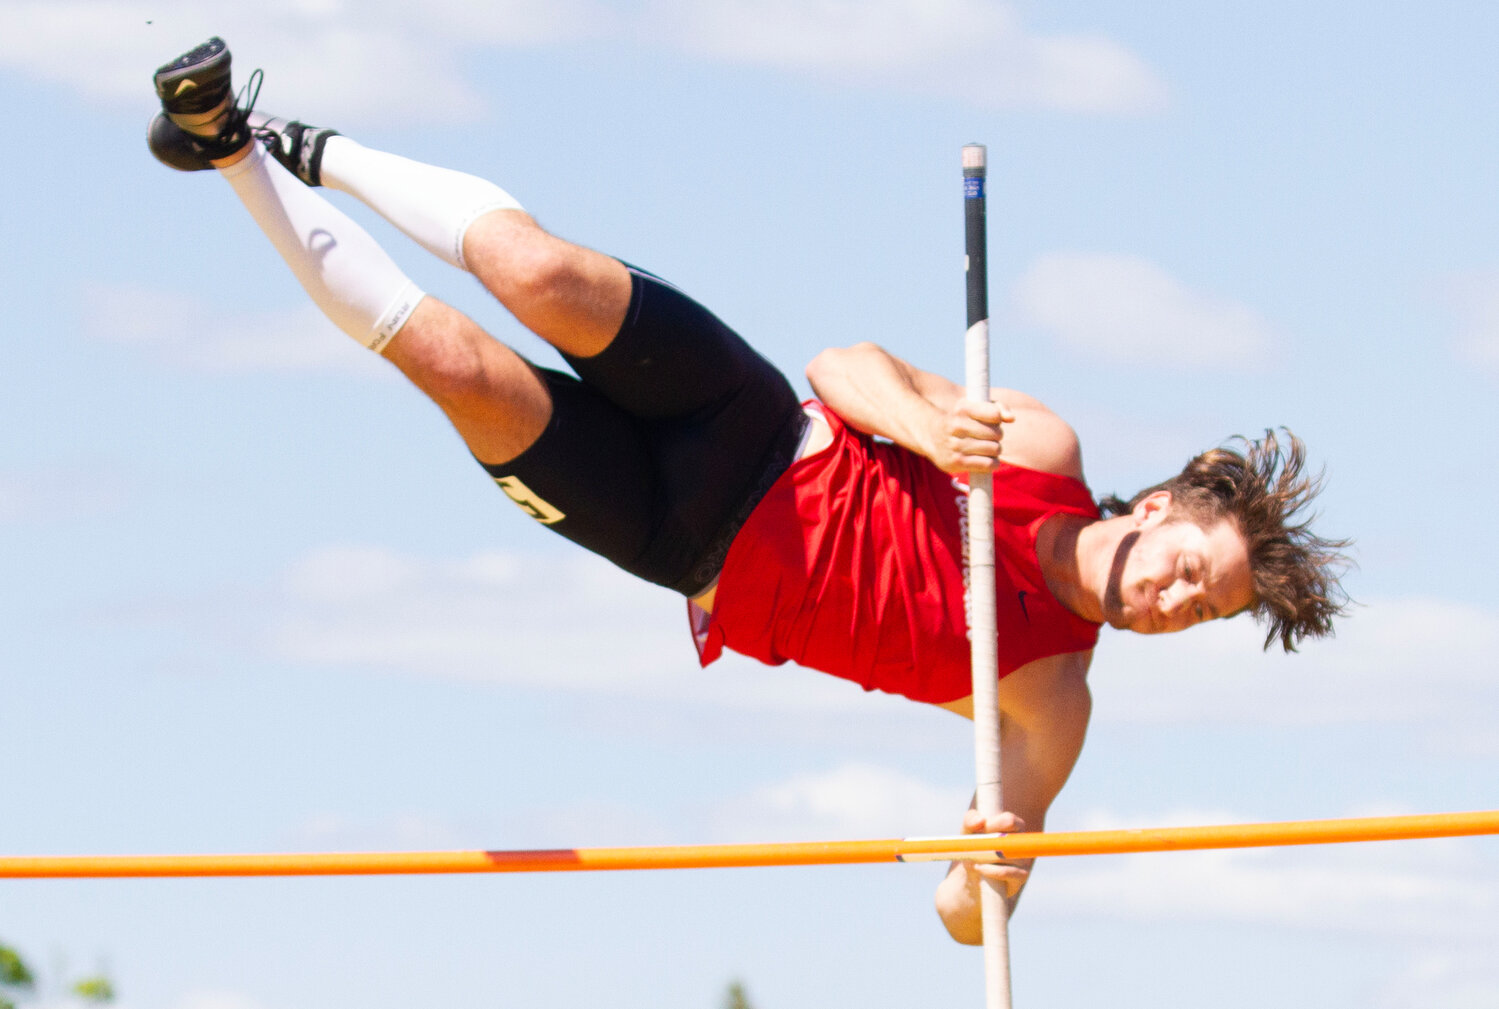 Christian Claytor took second place in the boys’ pole vault with a vault of 11 feet even.